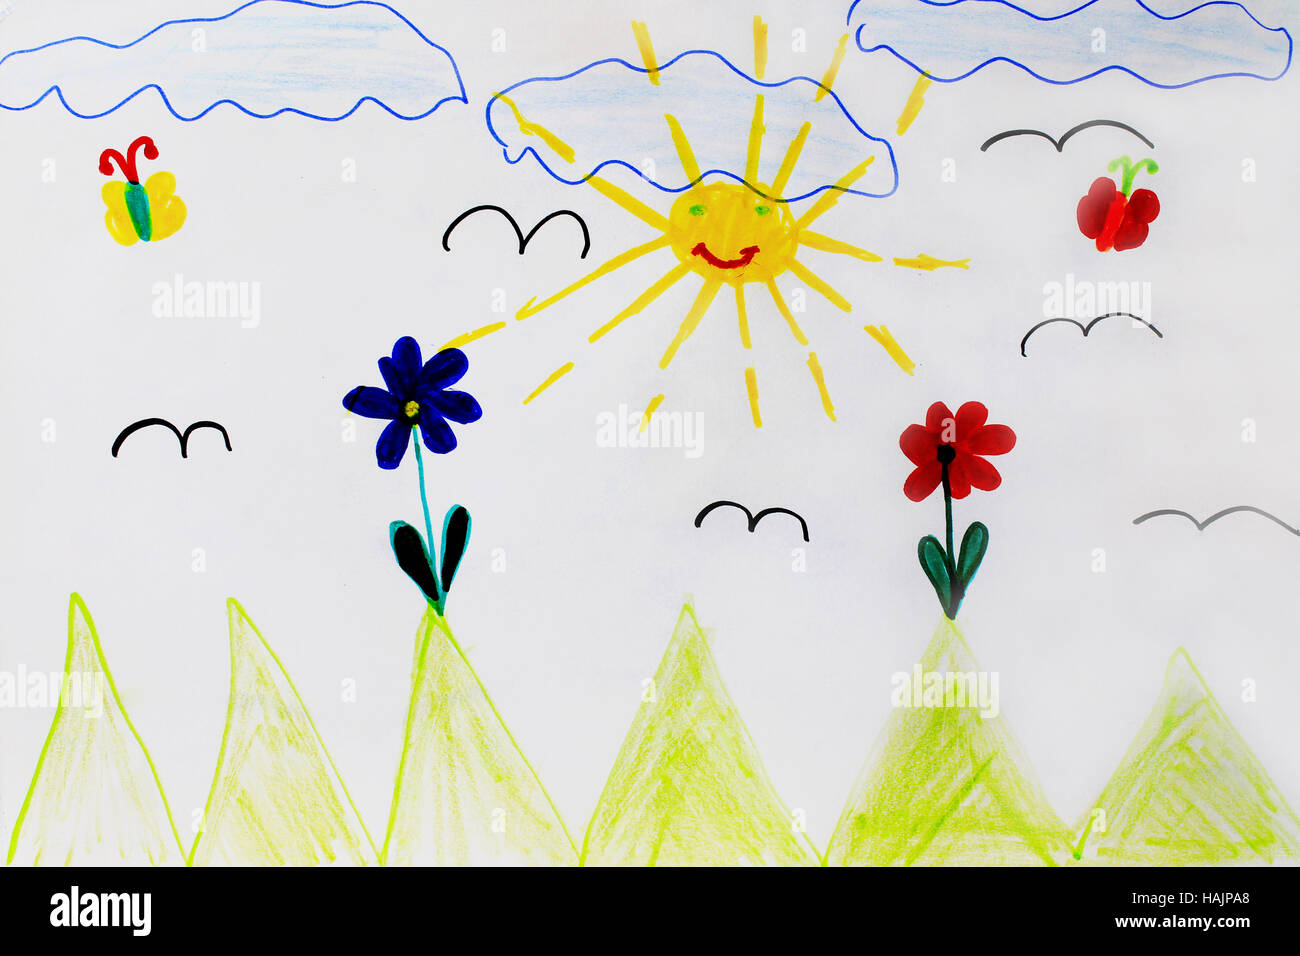 Childish colored drawing of funny sun flowers and clouds Stock Photo